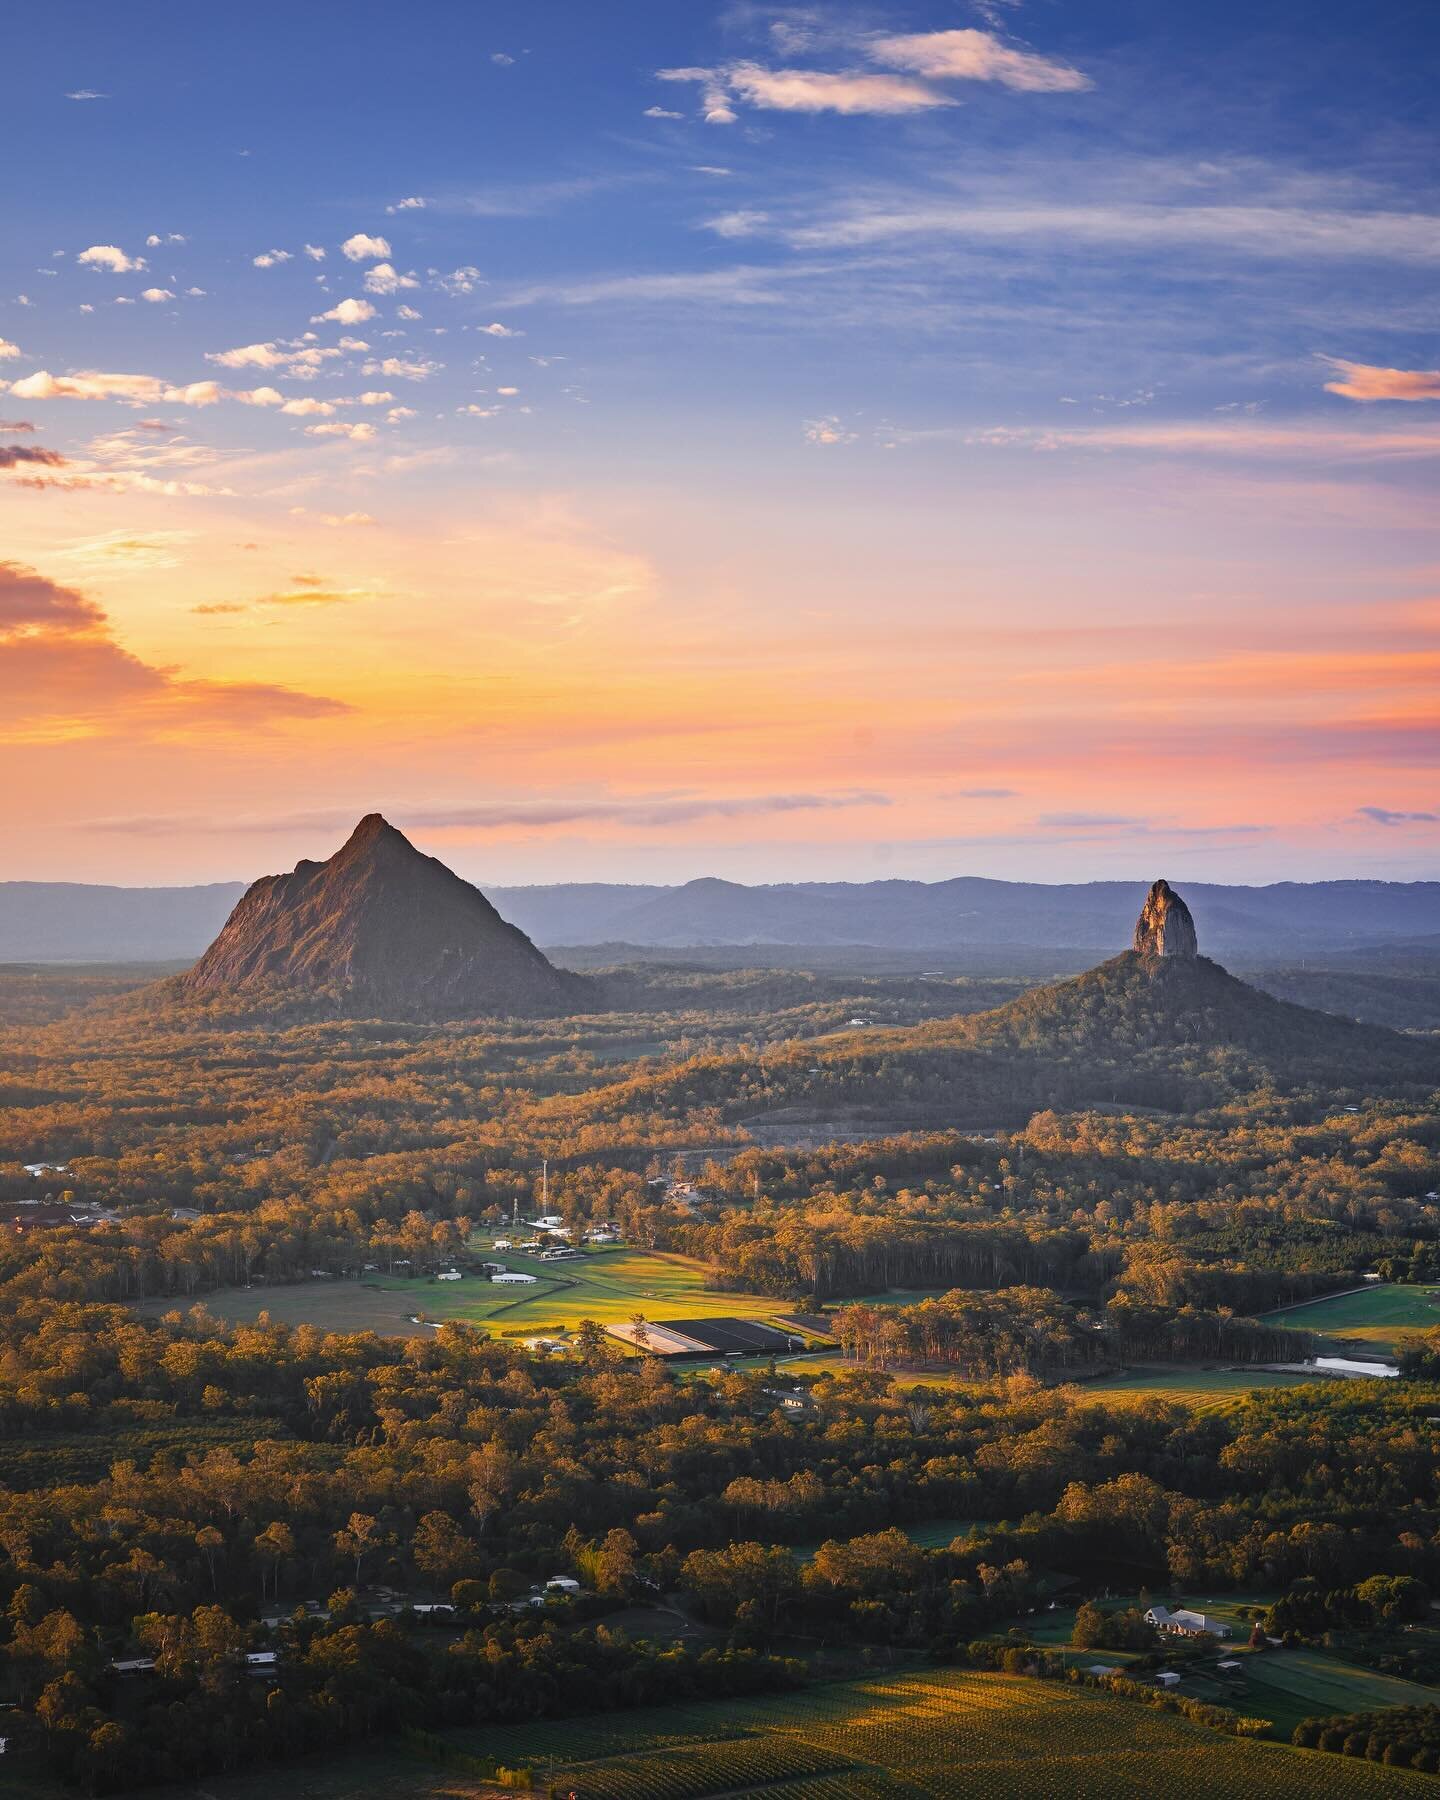 A colourful sunset from the Glass House Mountains. I absolutely love this angle where the mountains and farmland catch the shadows on the side, amplifying the vivid colours! From left to right in this photograph, you can spot Tibberoowuccum, Beerwah,